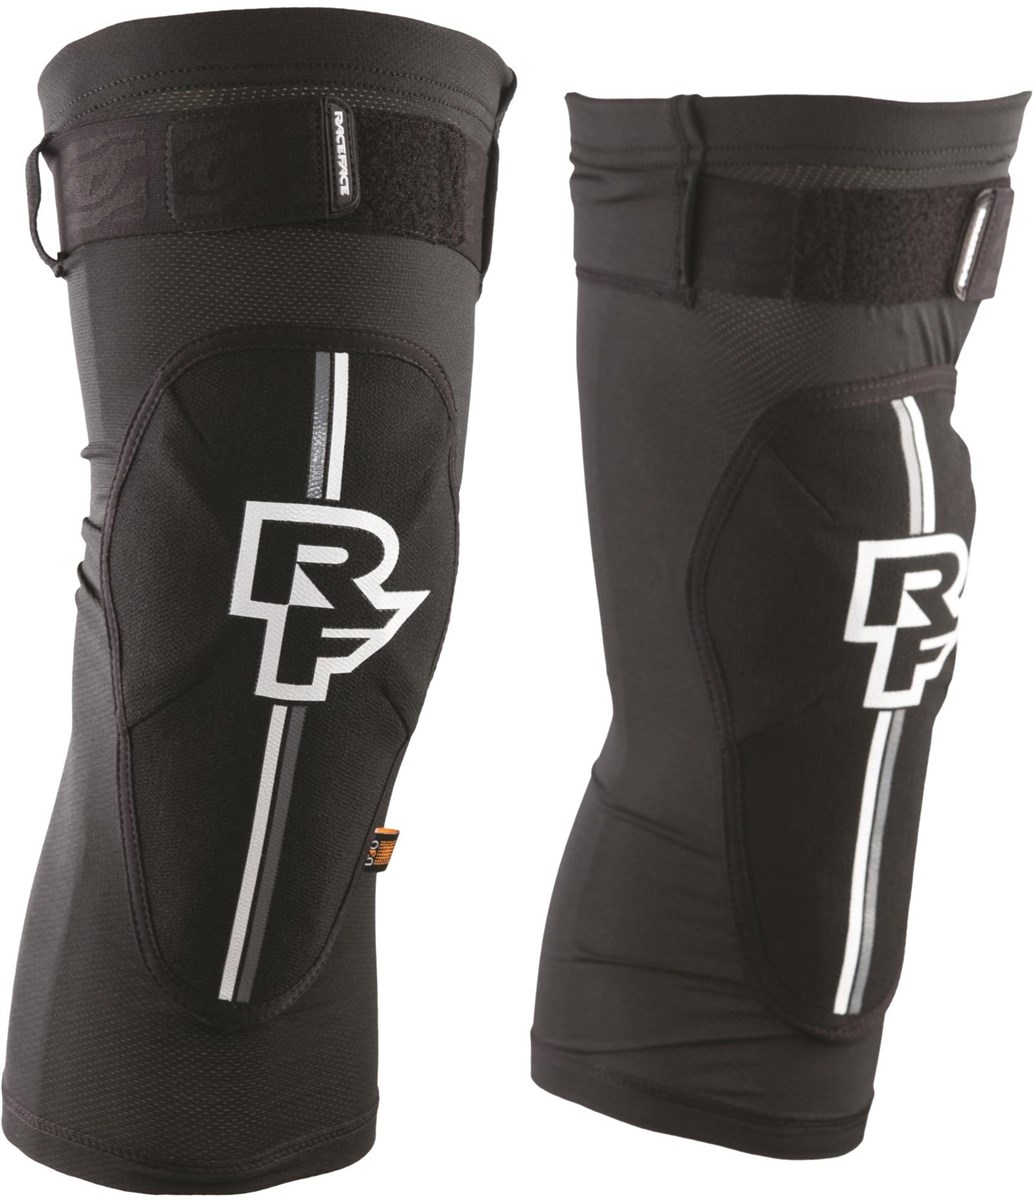 Race Face Indy Knee D30 Guard product image